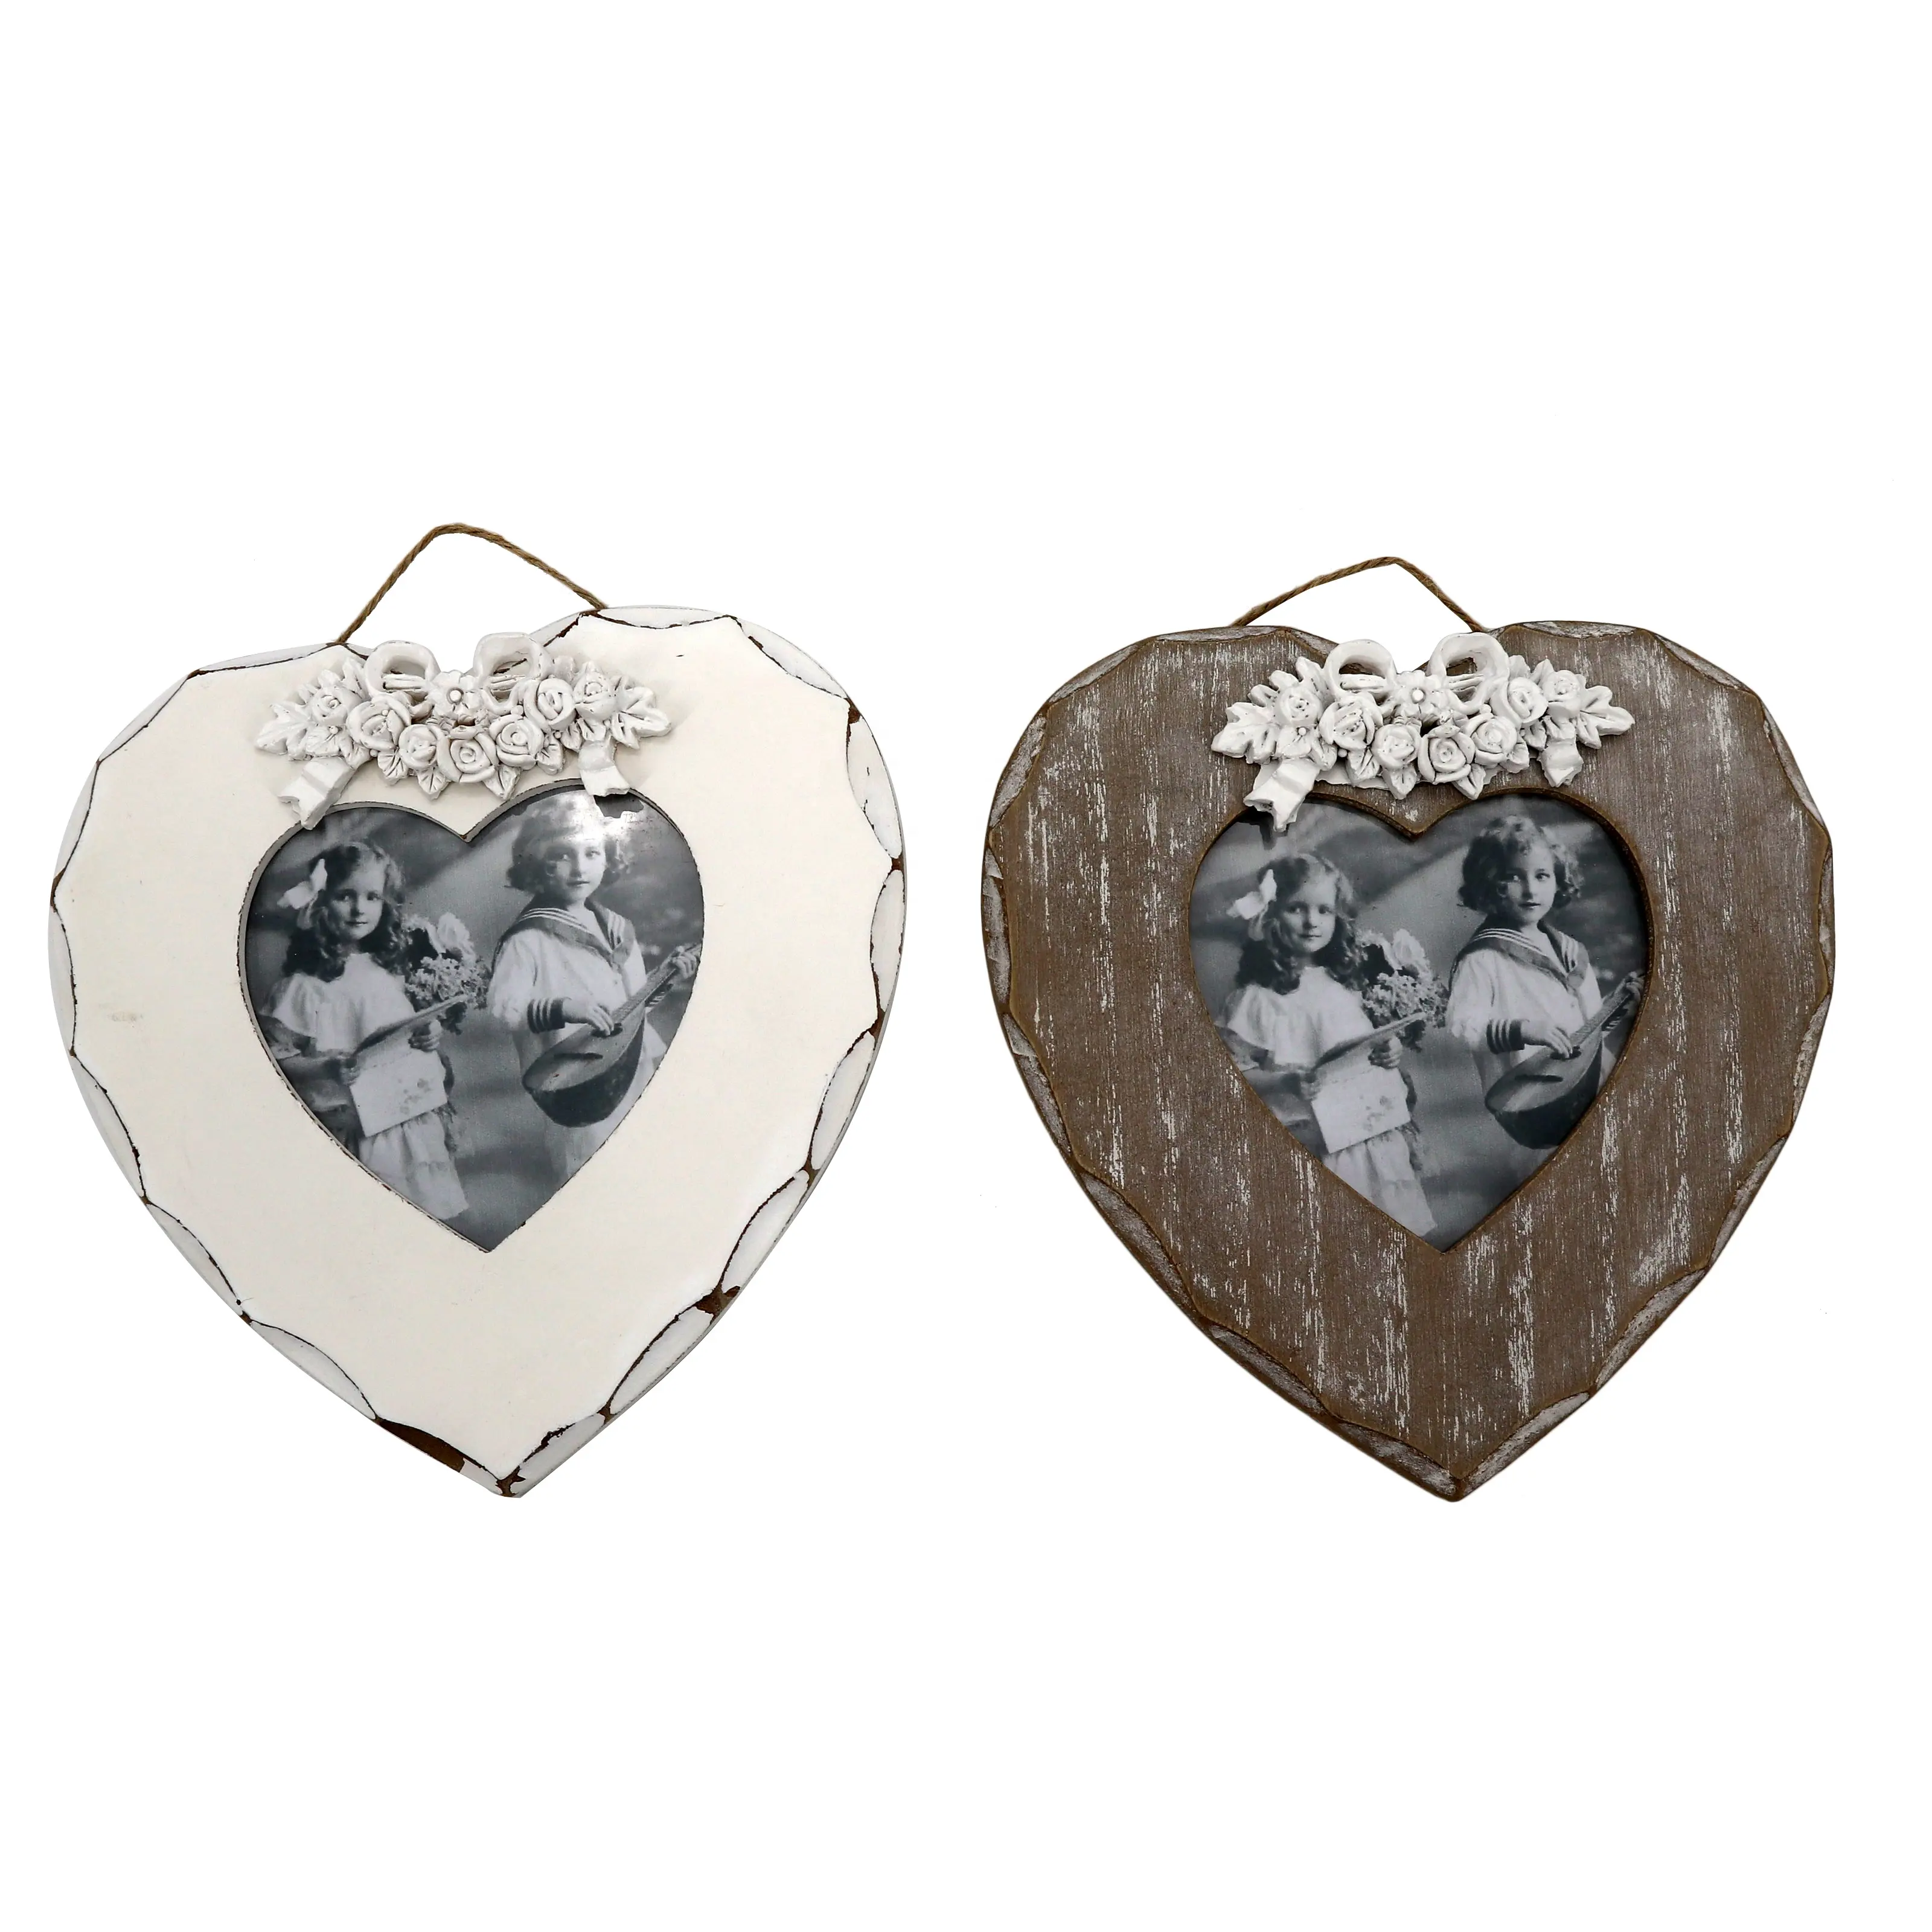 Classical Heart Shape Love Handmade Decorative Wall Mounted Wooden Hanging Picture Photo Frame